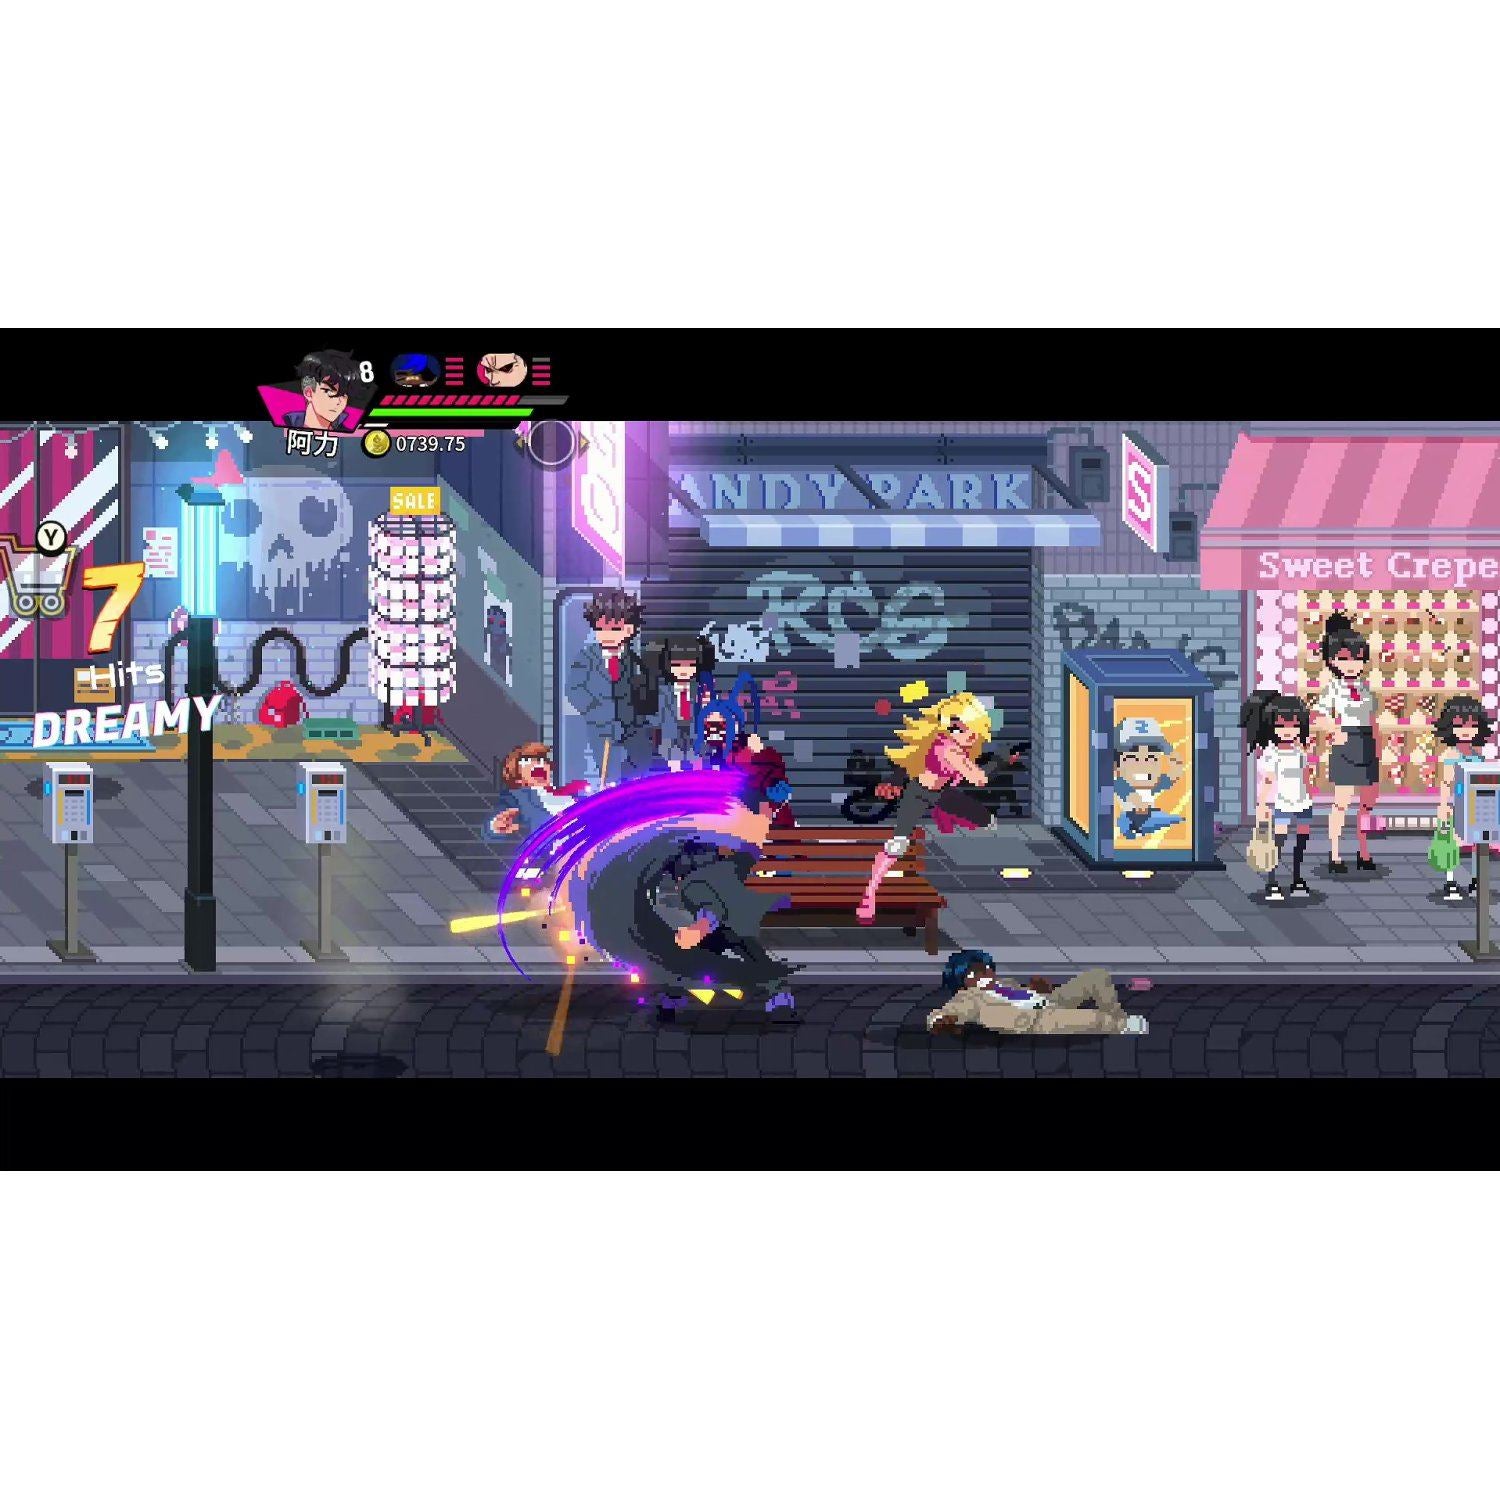 River City Girls 2 (English Subtitles) - (NSW) Nintendo Switch (Asia Import) Video Games Arc System Works   